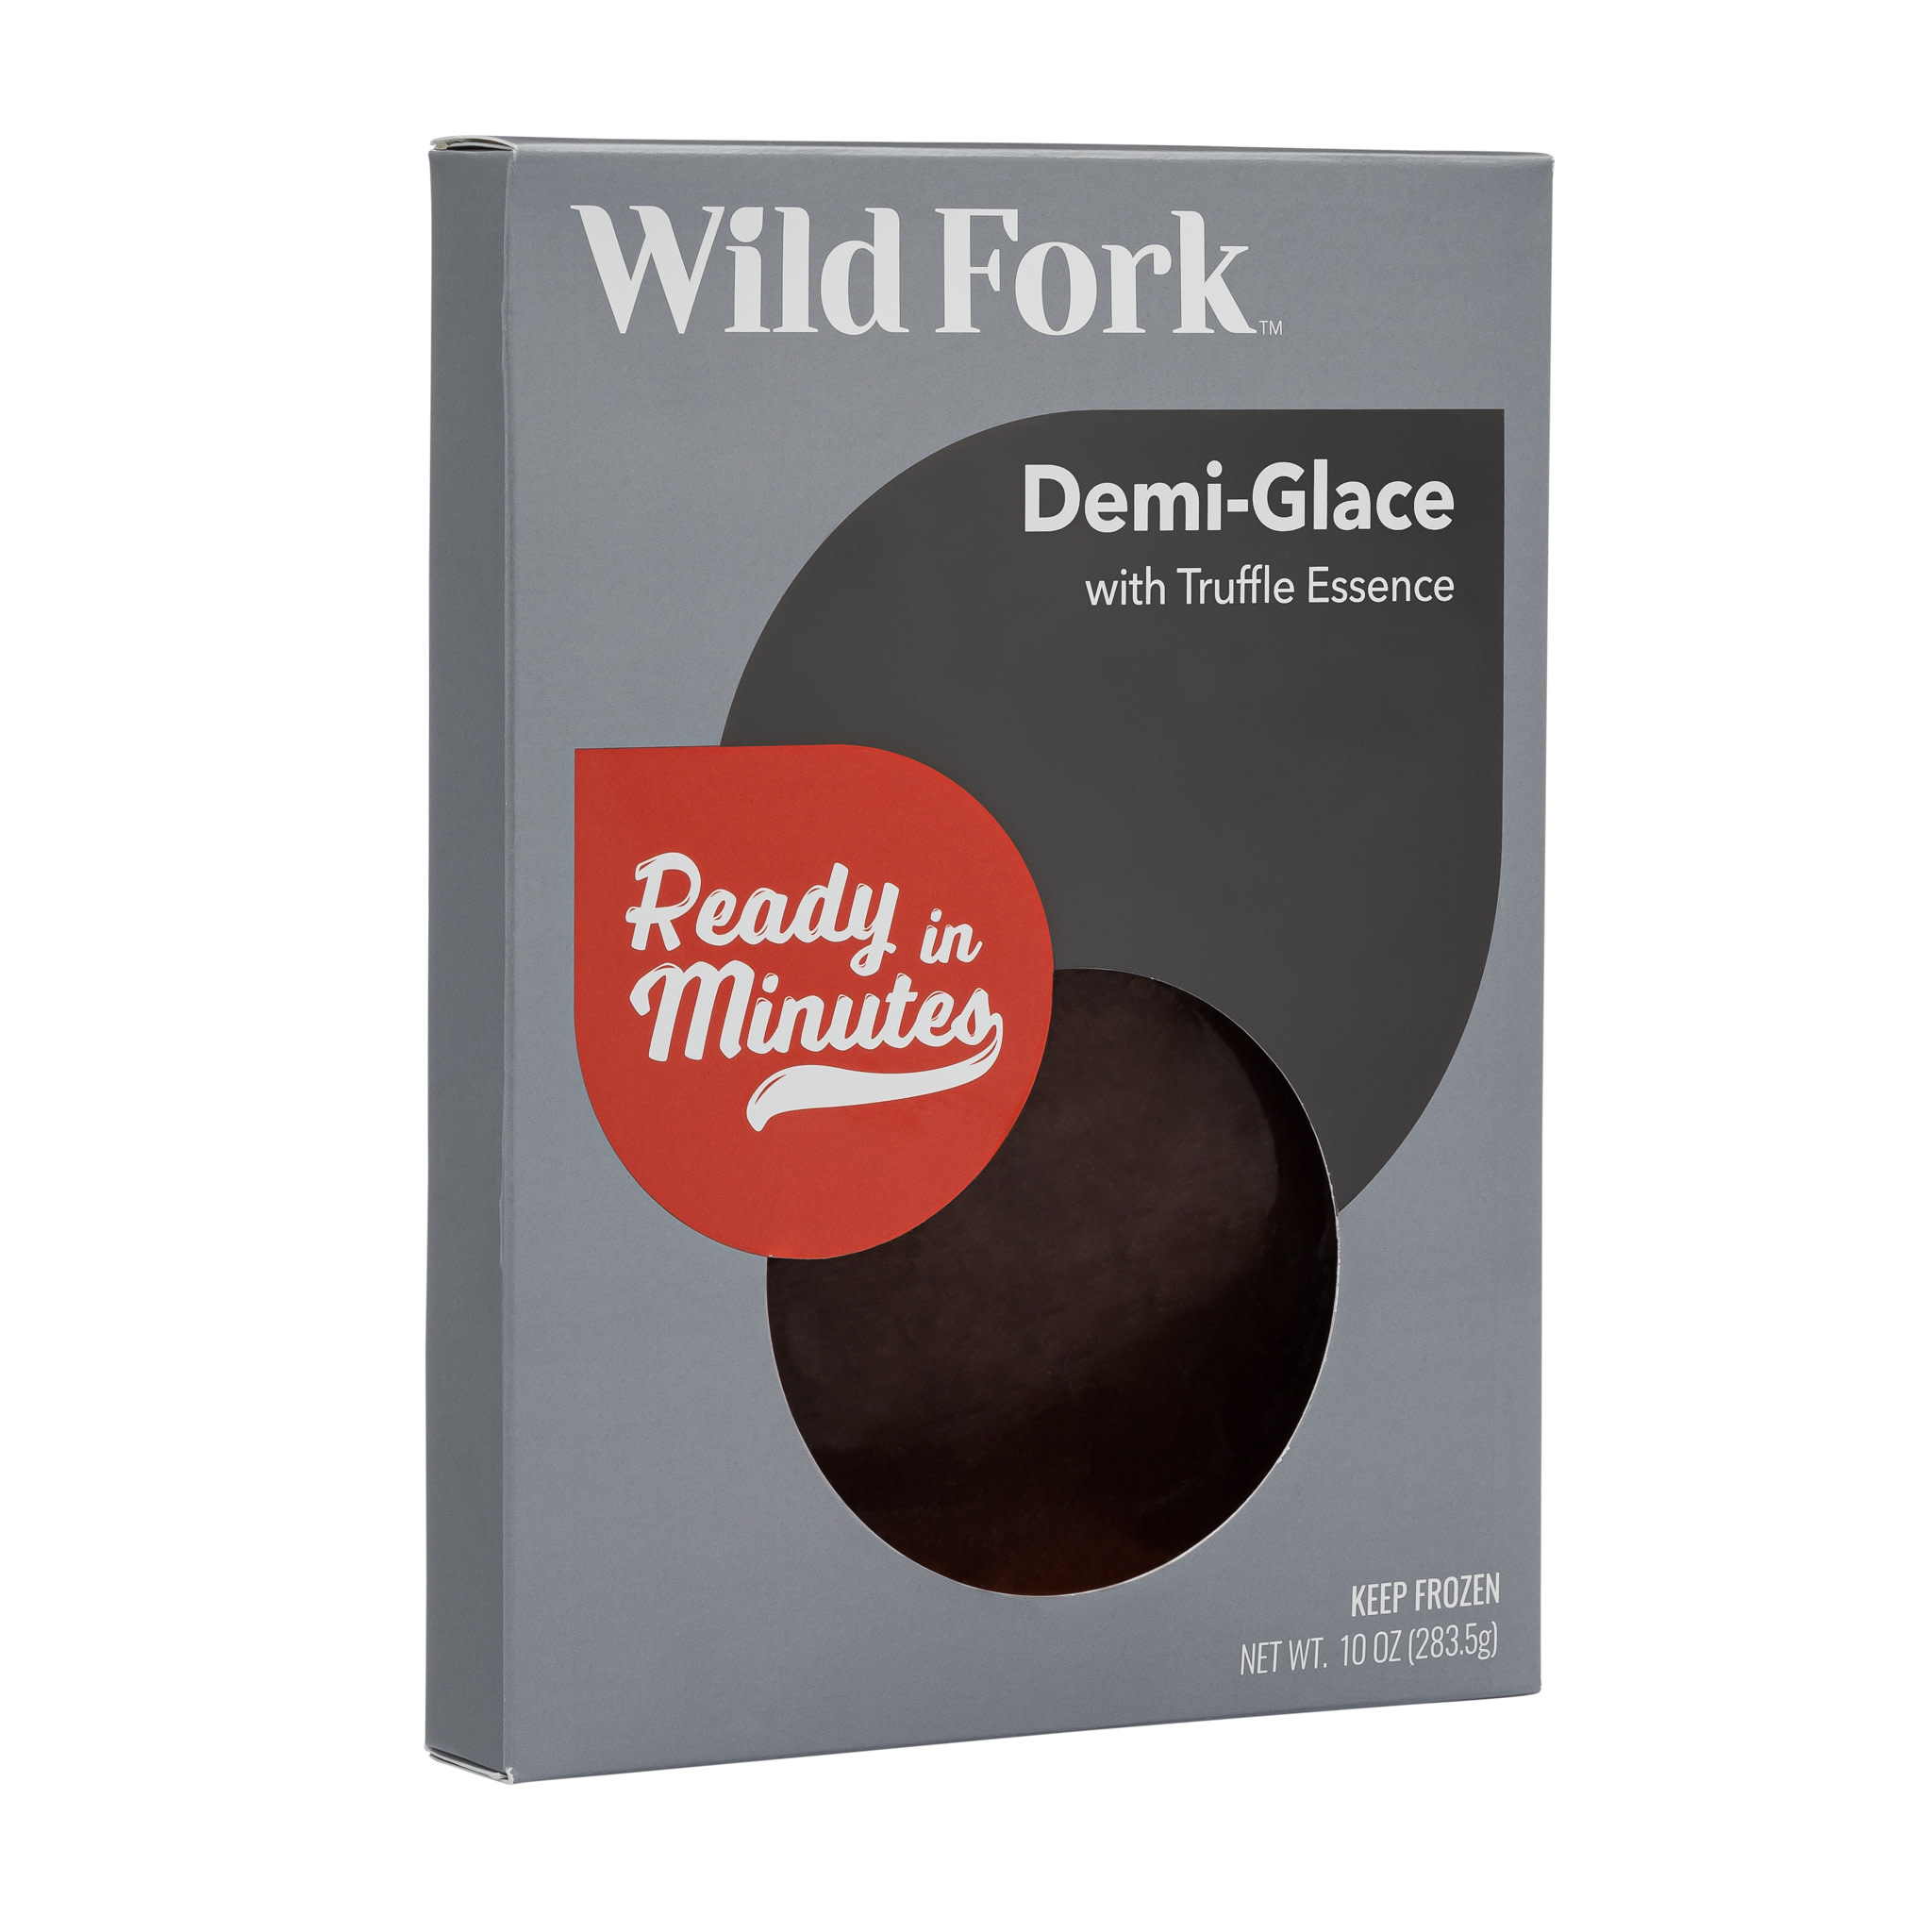 7231 WF PACKAGED DEMI GLACE WITH TRUFFLE ESSENCE SAUCE SPICE